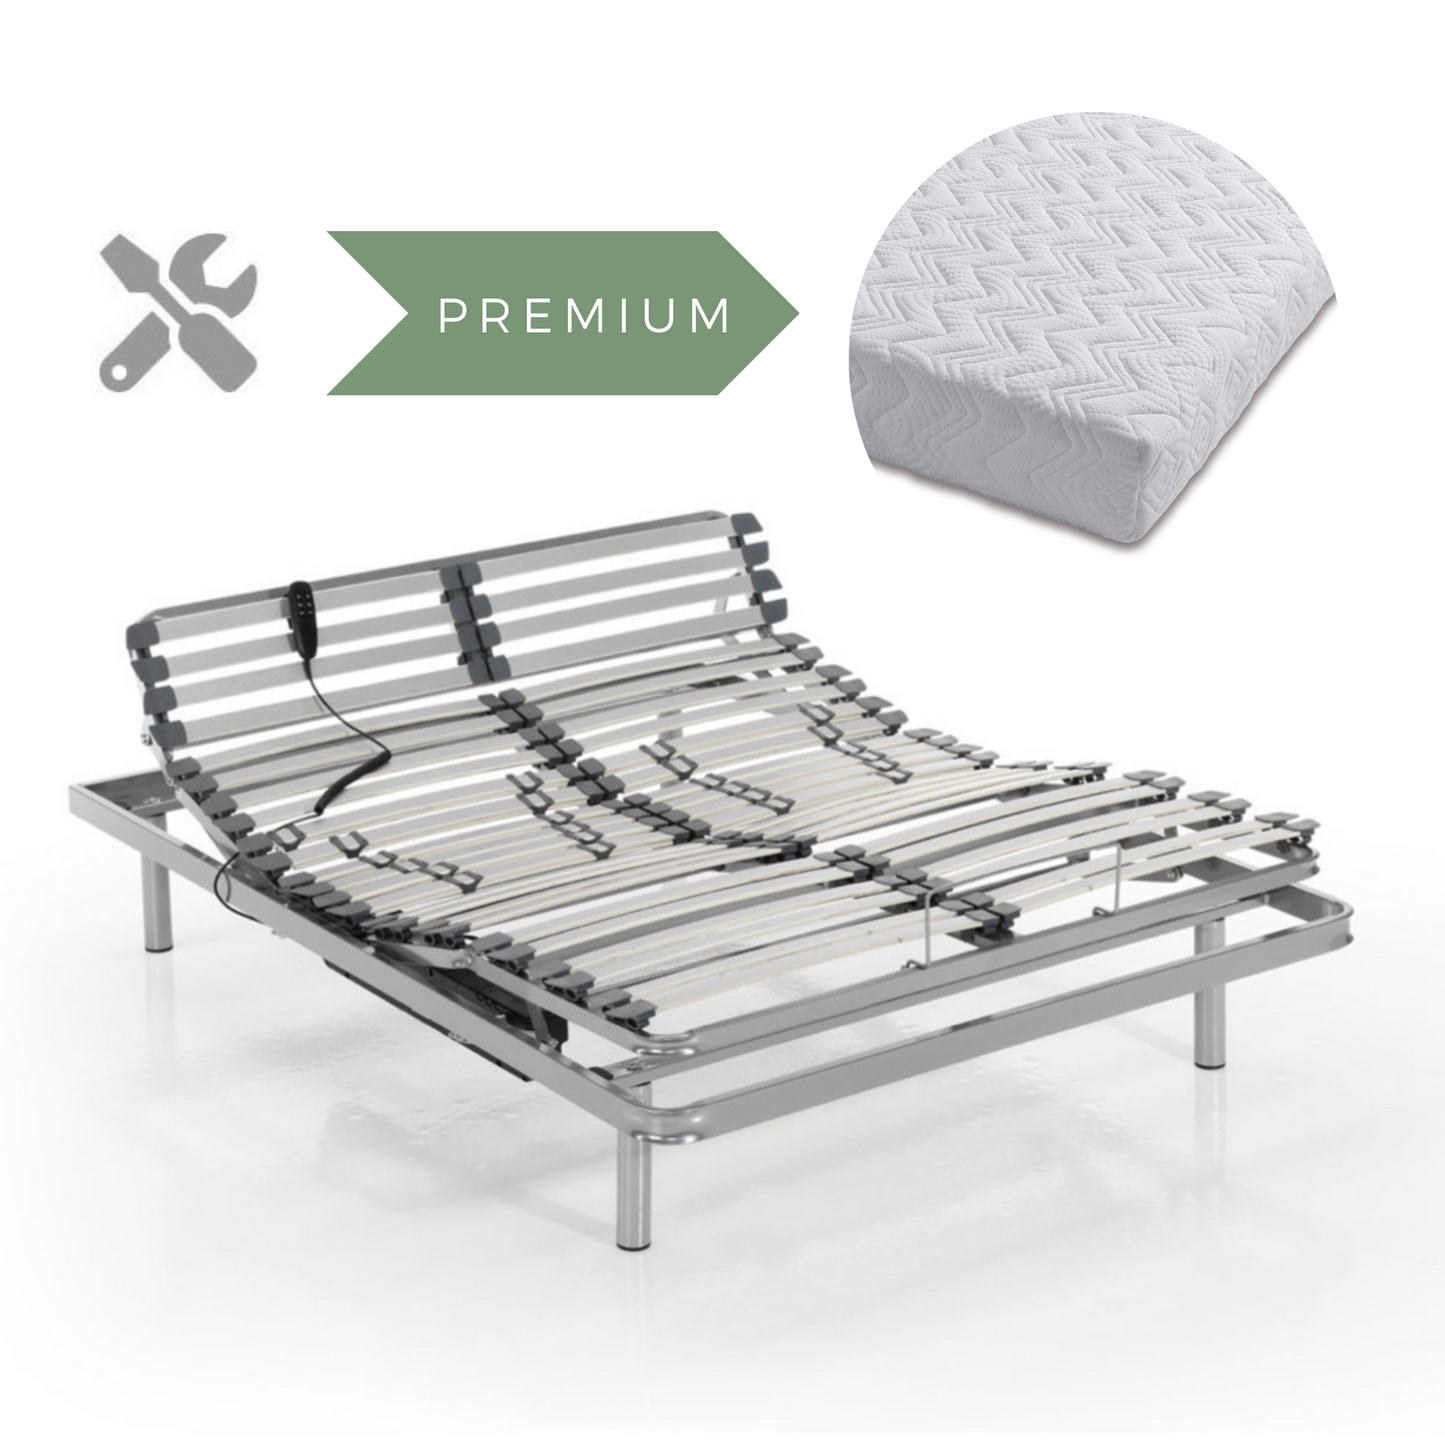 Adjustable Bed and Natura Premium Mattress Set | Assembly included